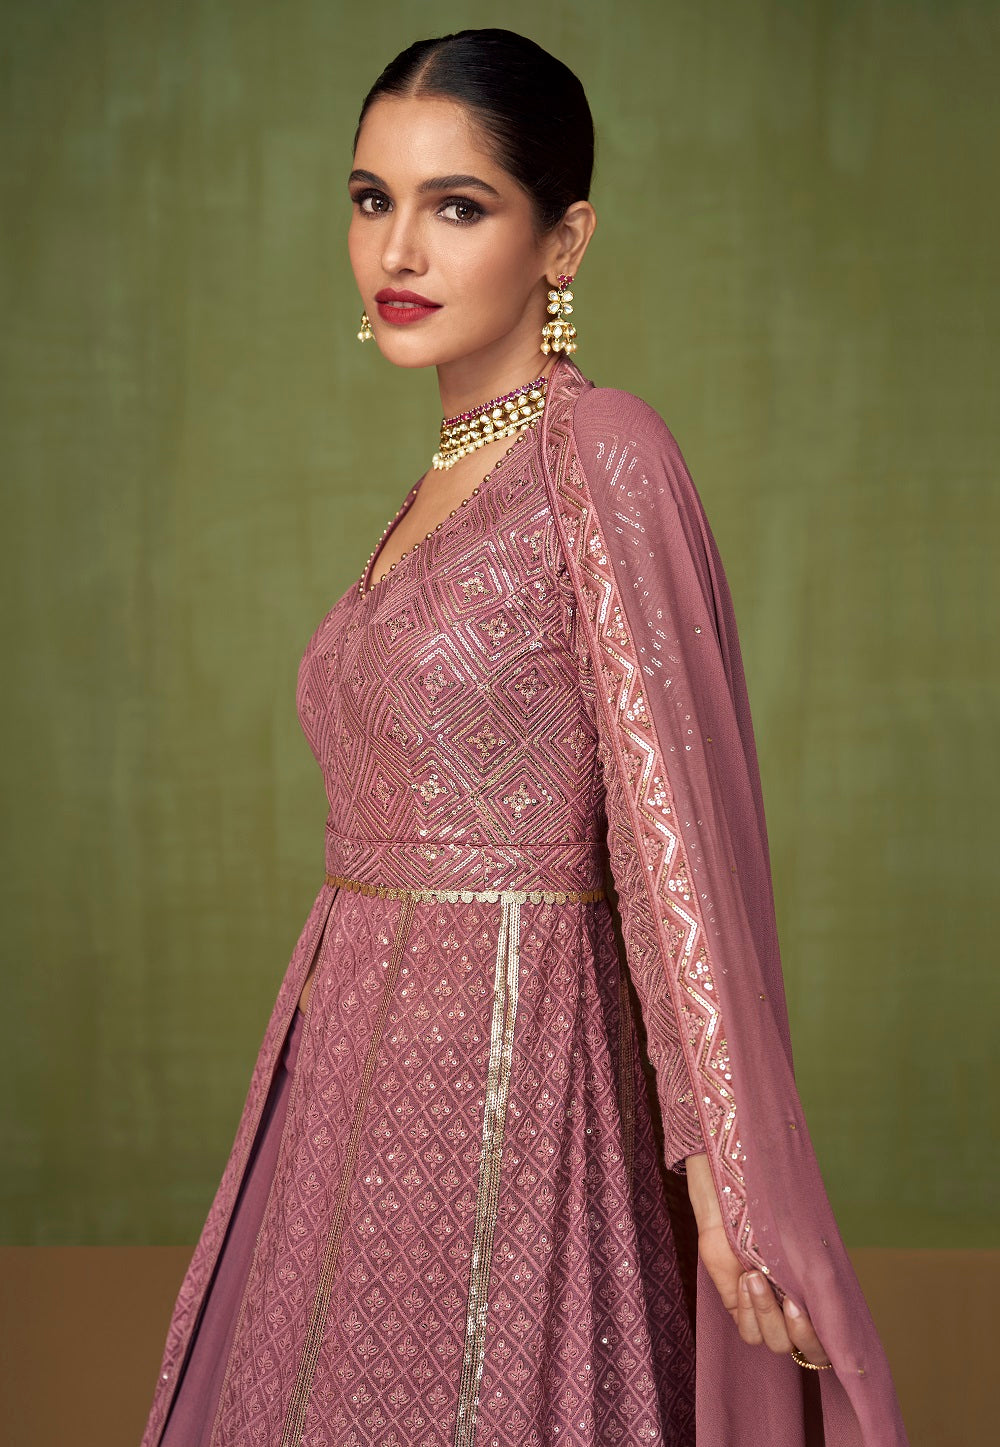 Georgette Embroidered Lehenga in Old Rose